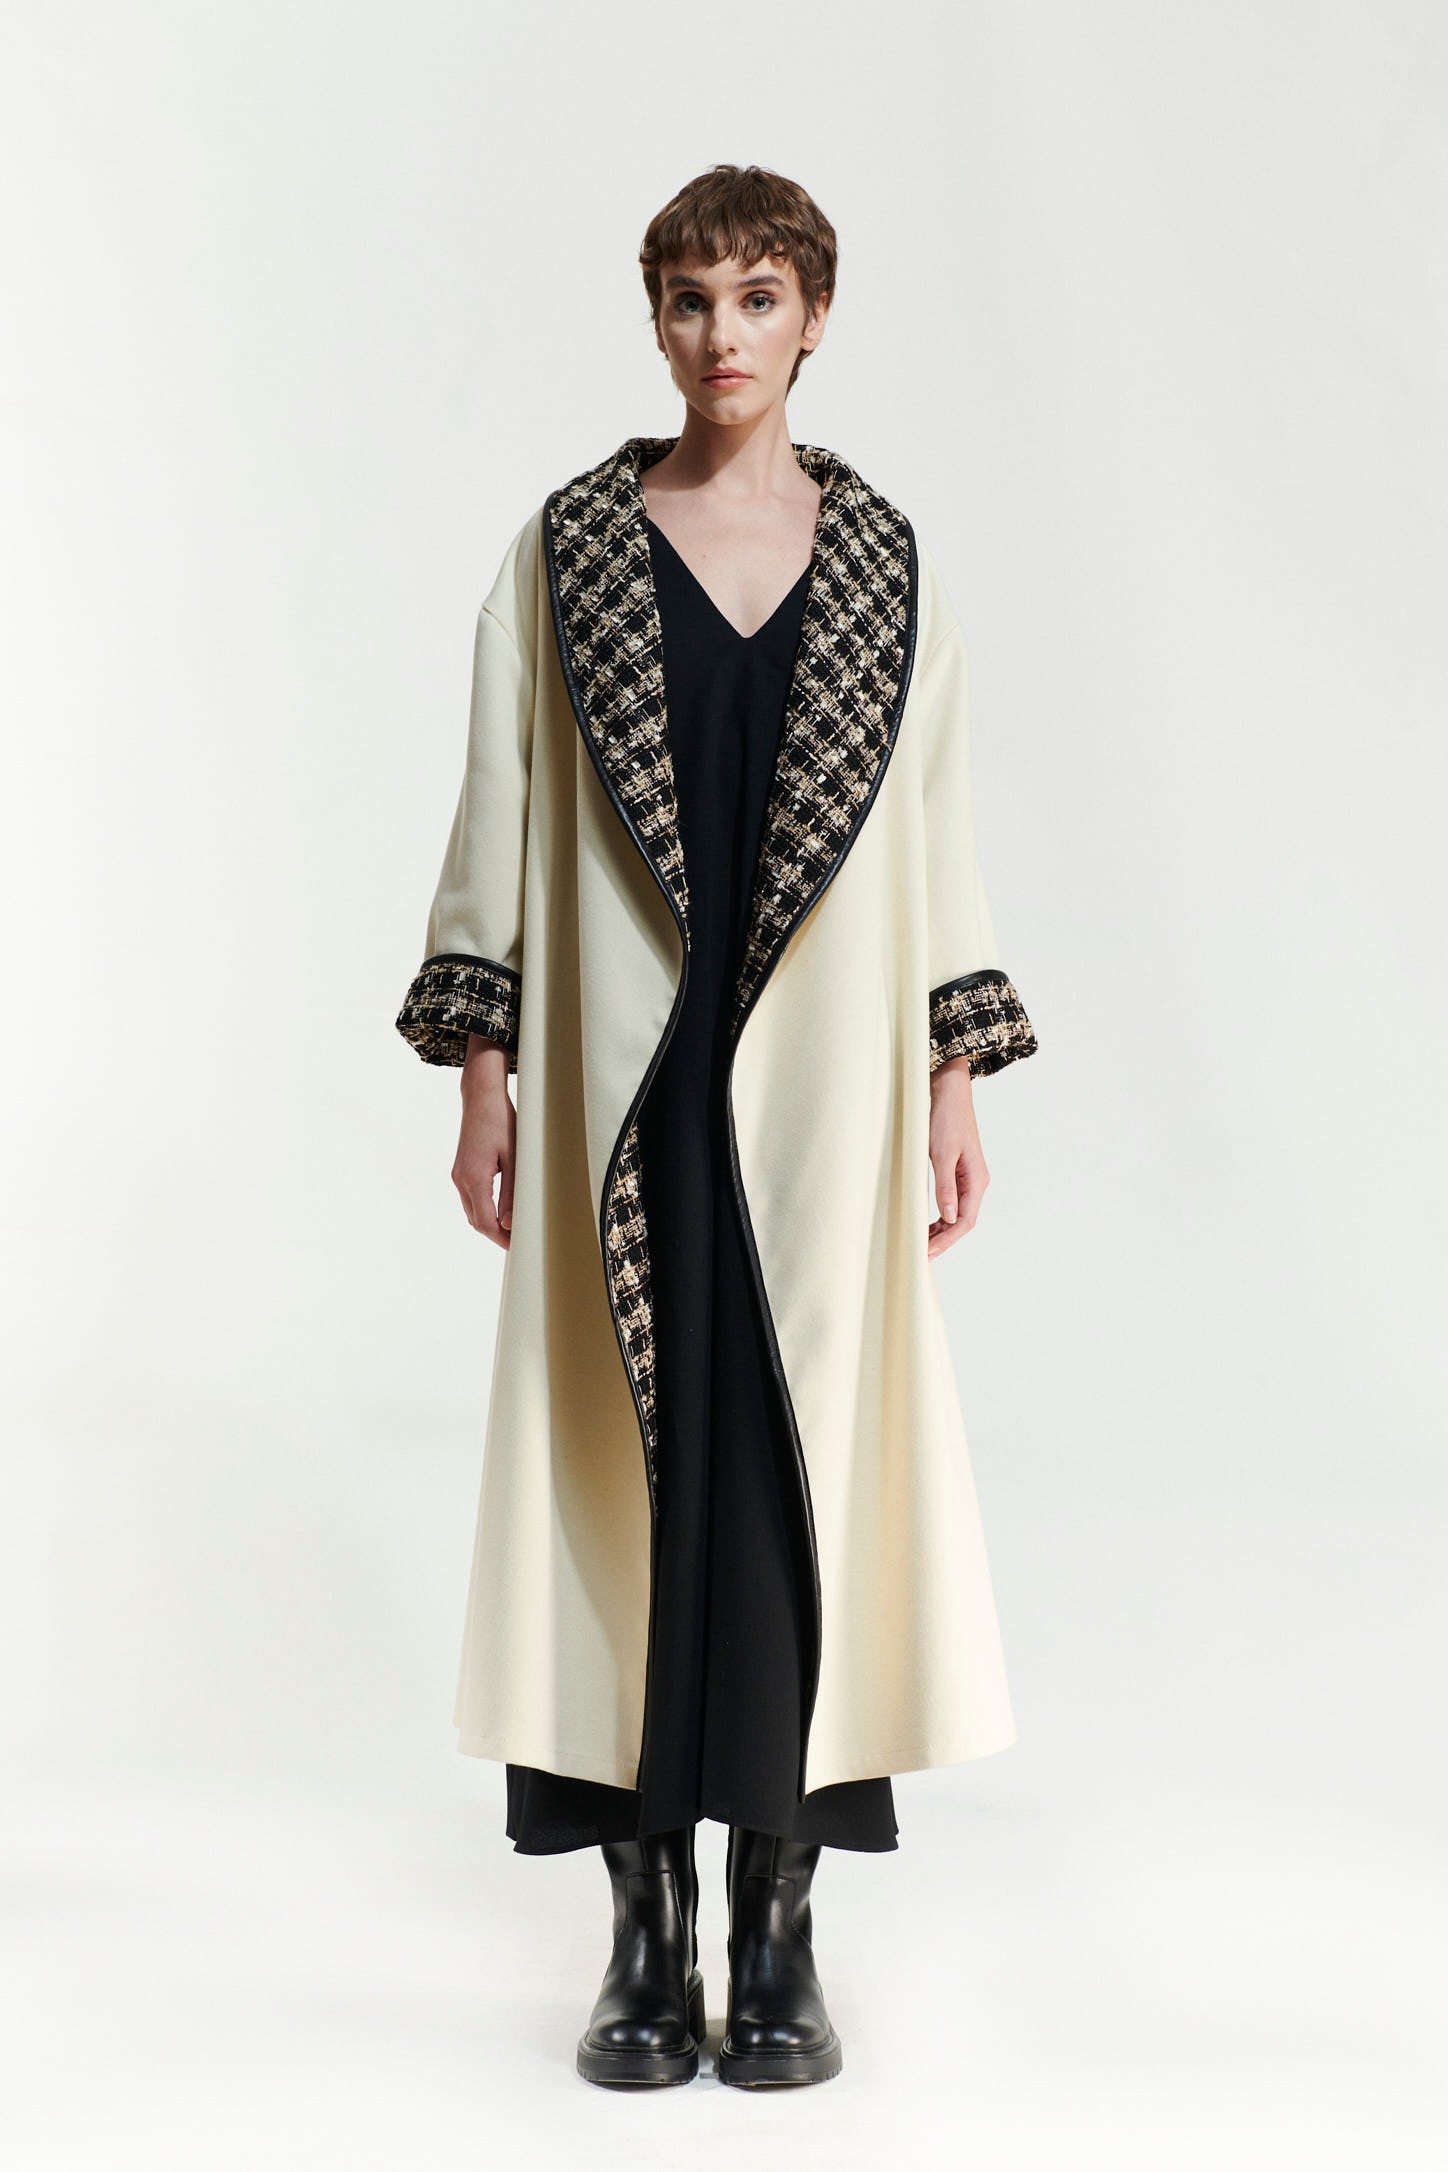 LEATHER BANDING, DOUBLE-SIDED USAGE, SHIGHTING SQUARE PATTERNED-CACHET COAT